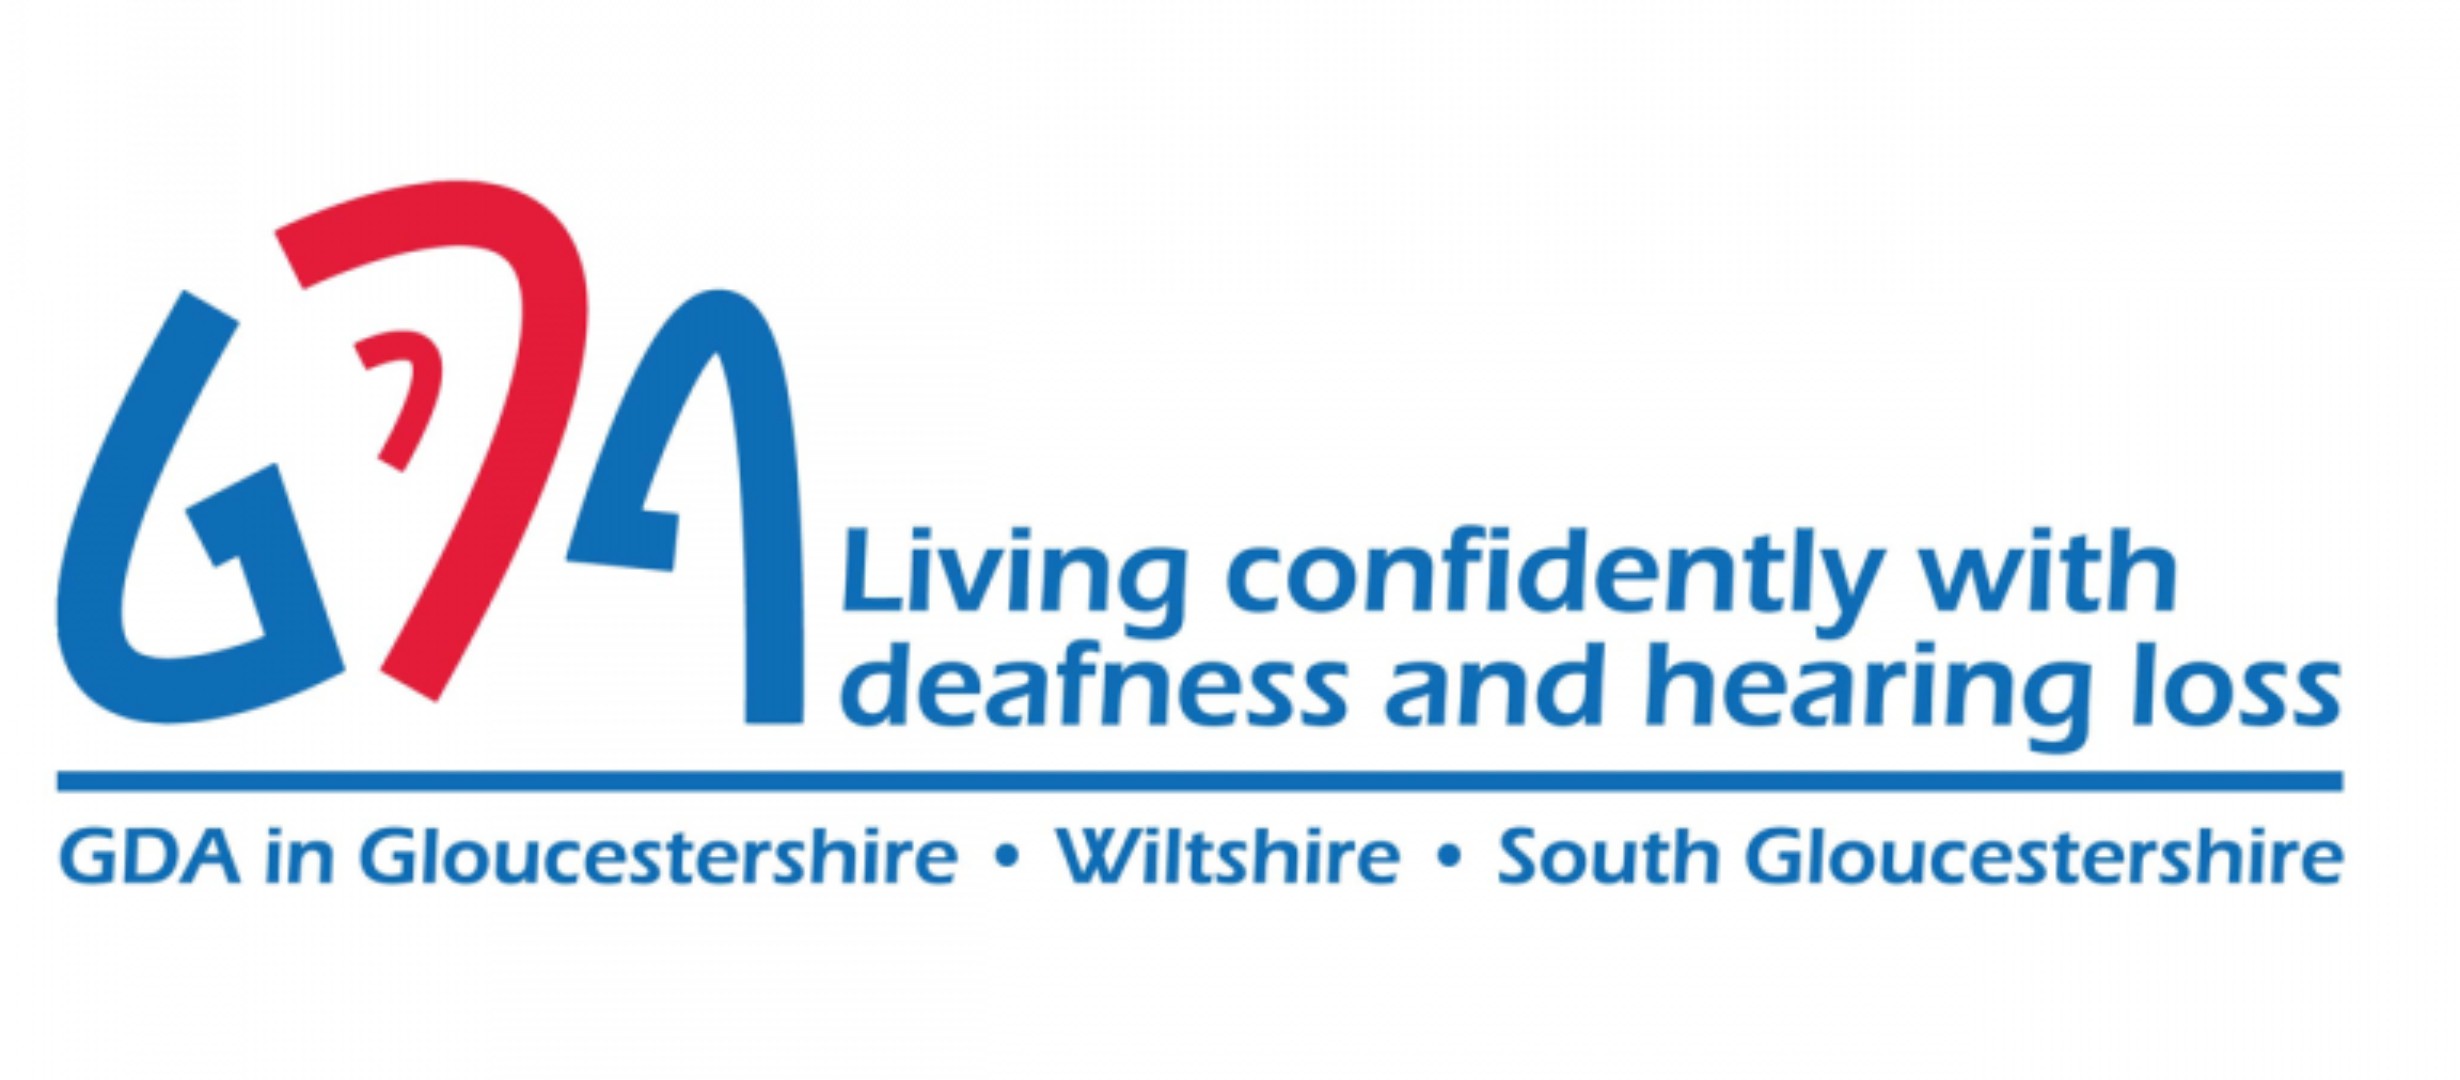 GDA - Living confidently with deafness and hearing loss - GDA in Gloucestershire, Wiltshire and South Gloucestershire